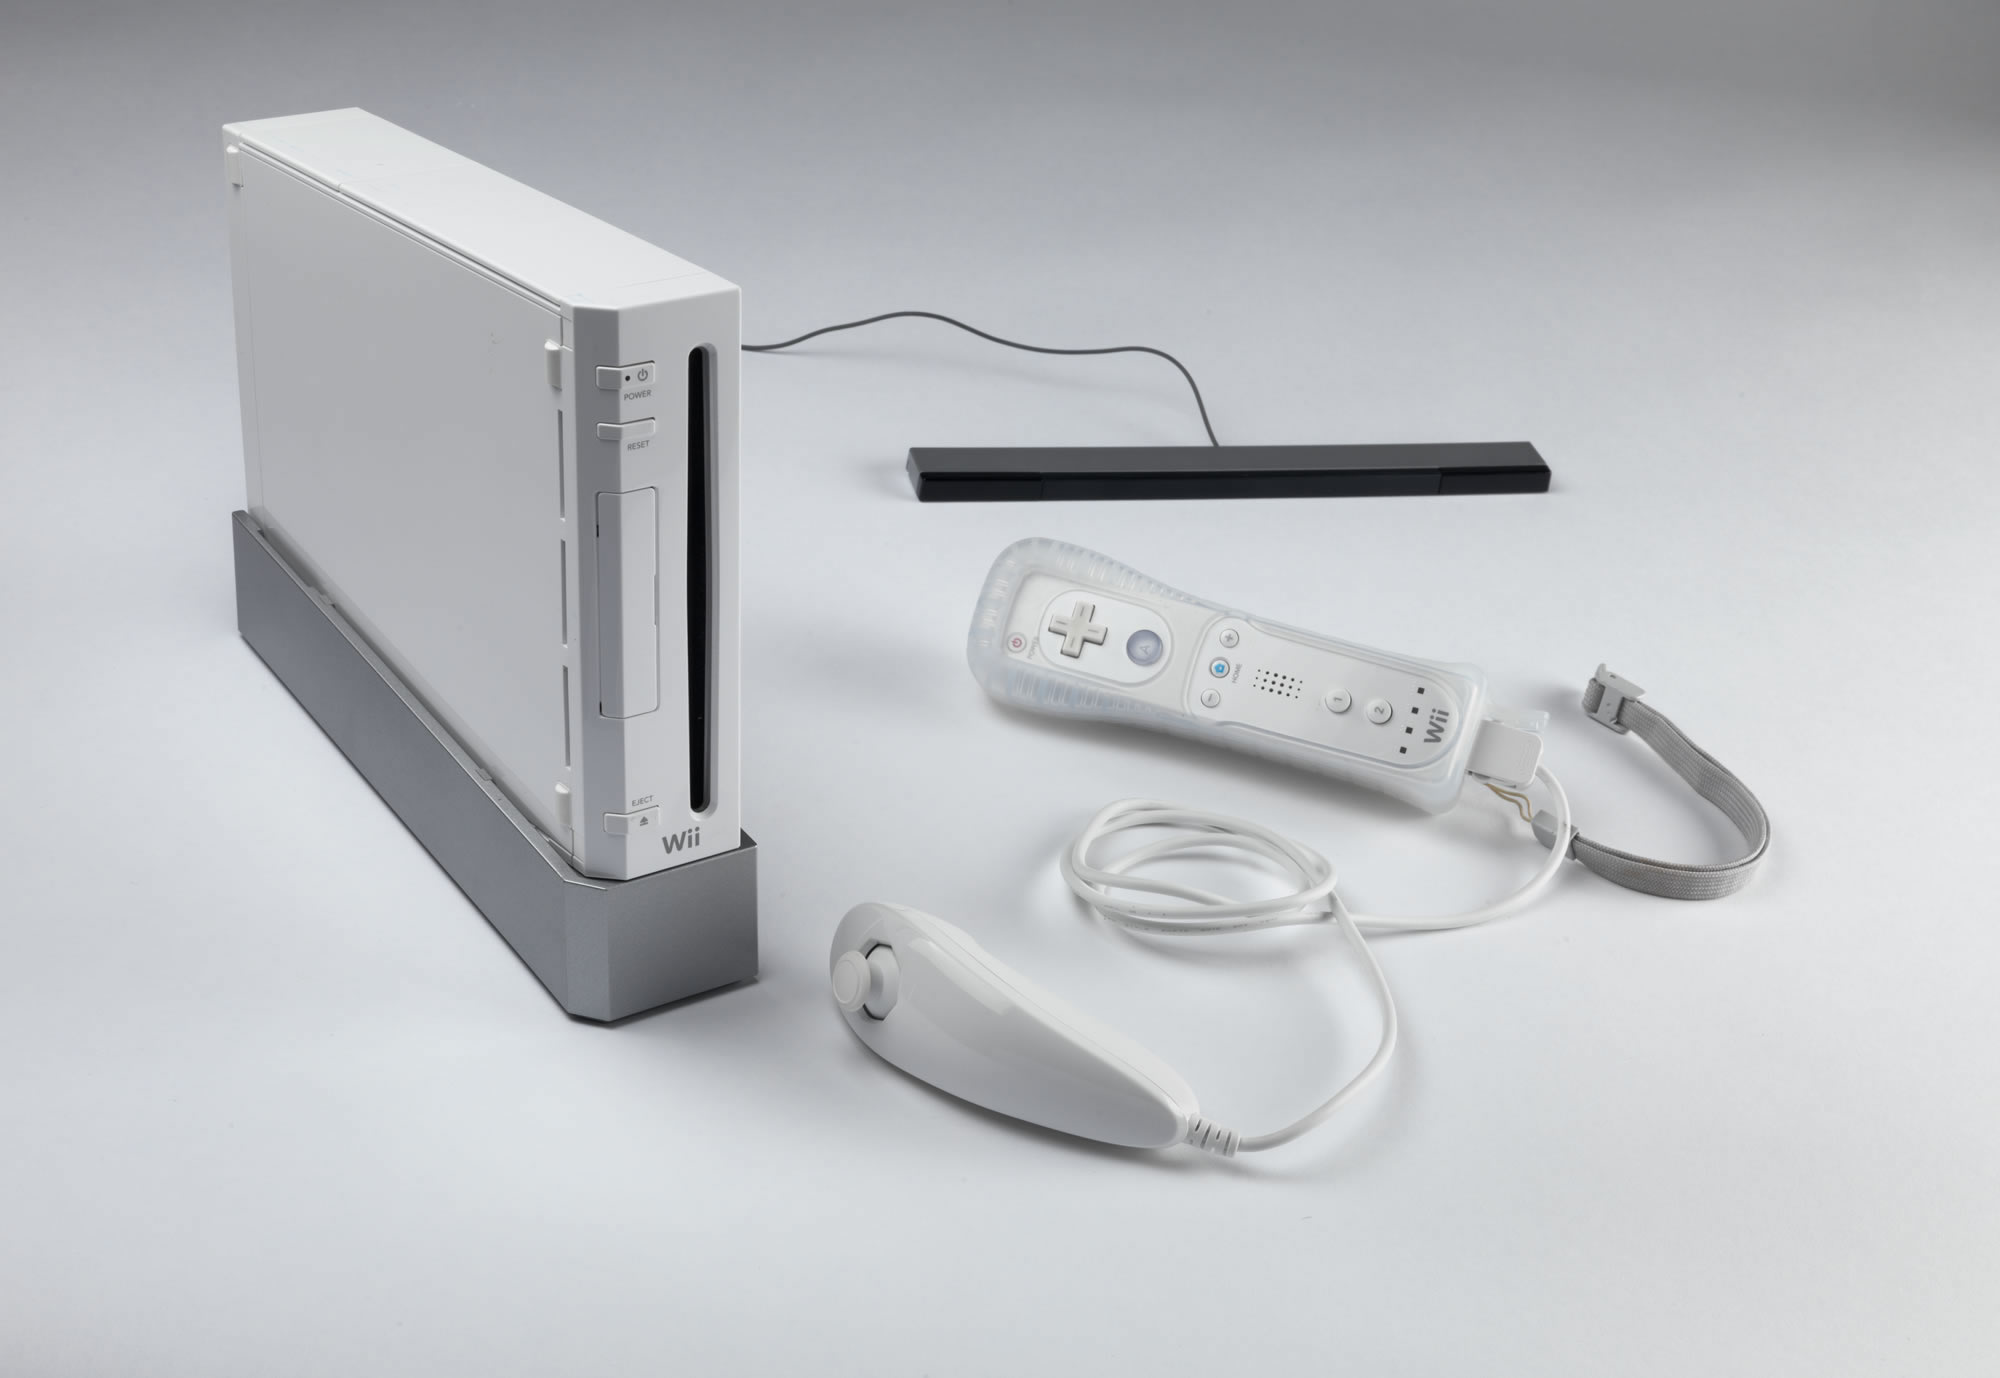 masterpiece Contradict accurately Nintendo Wii - The Interface Experience: Bard Graduate Center